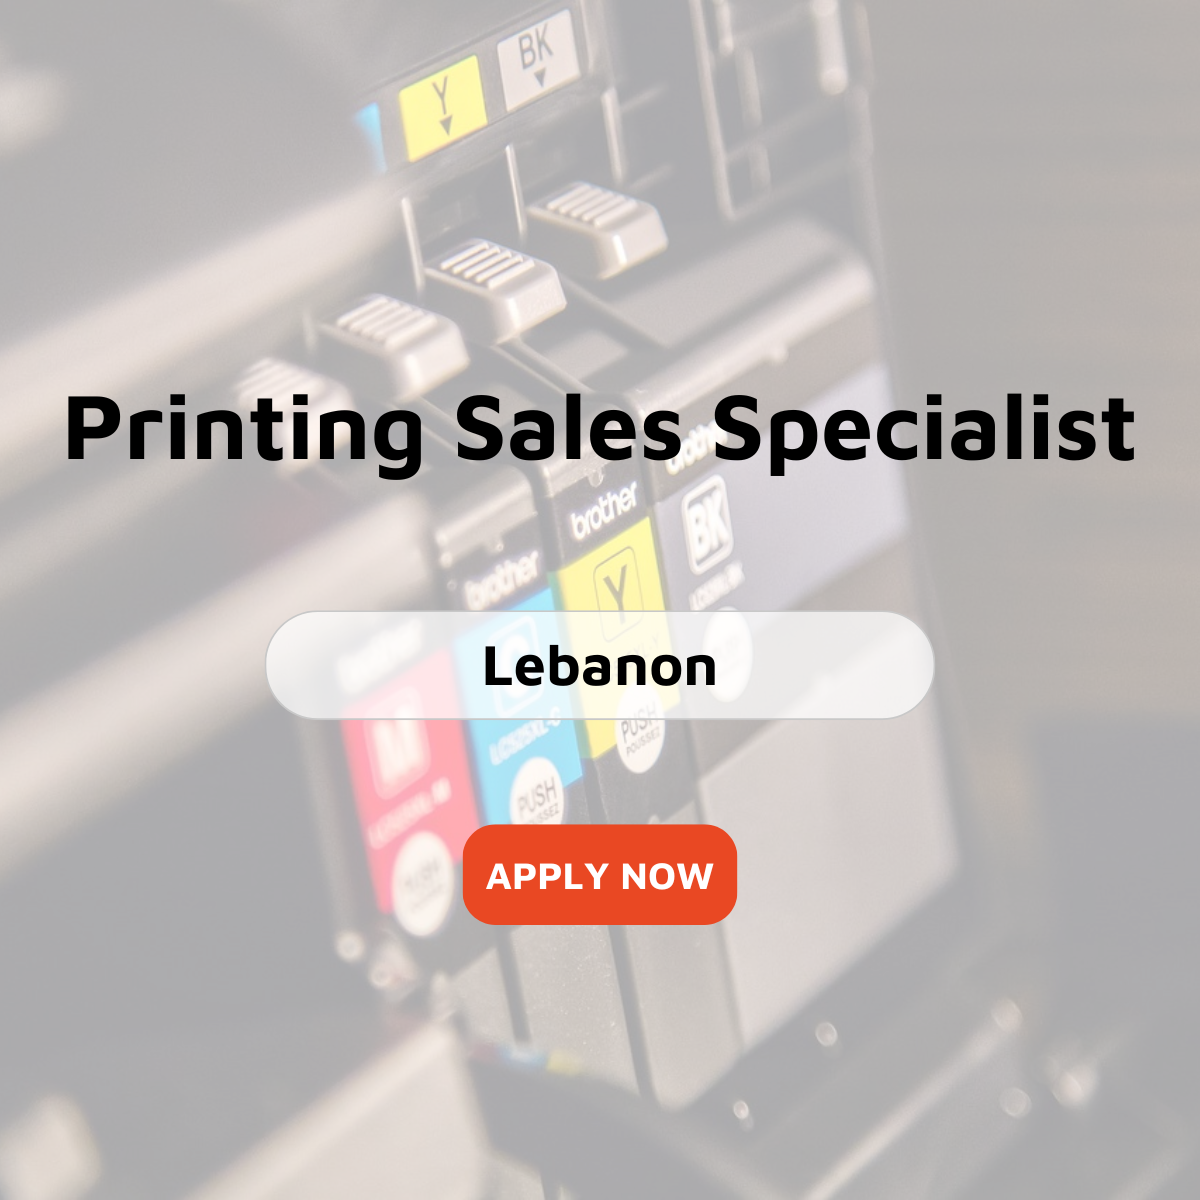 Printing Material Sales Specialist